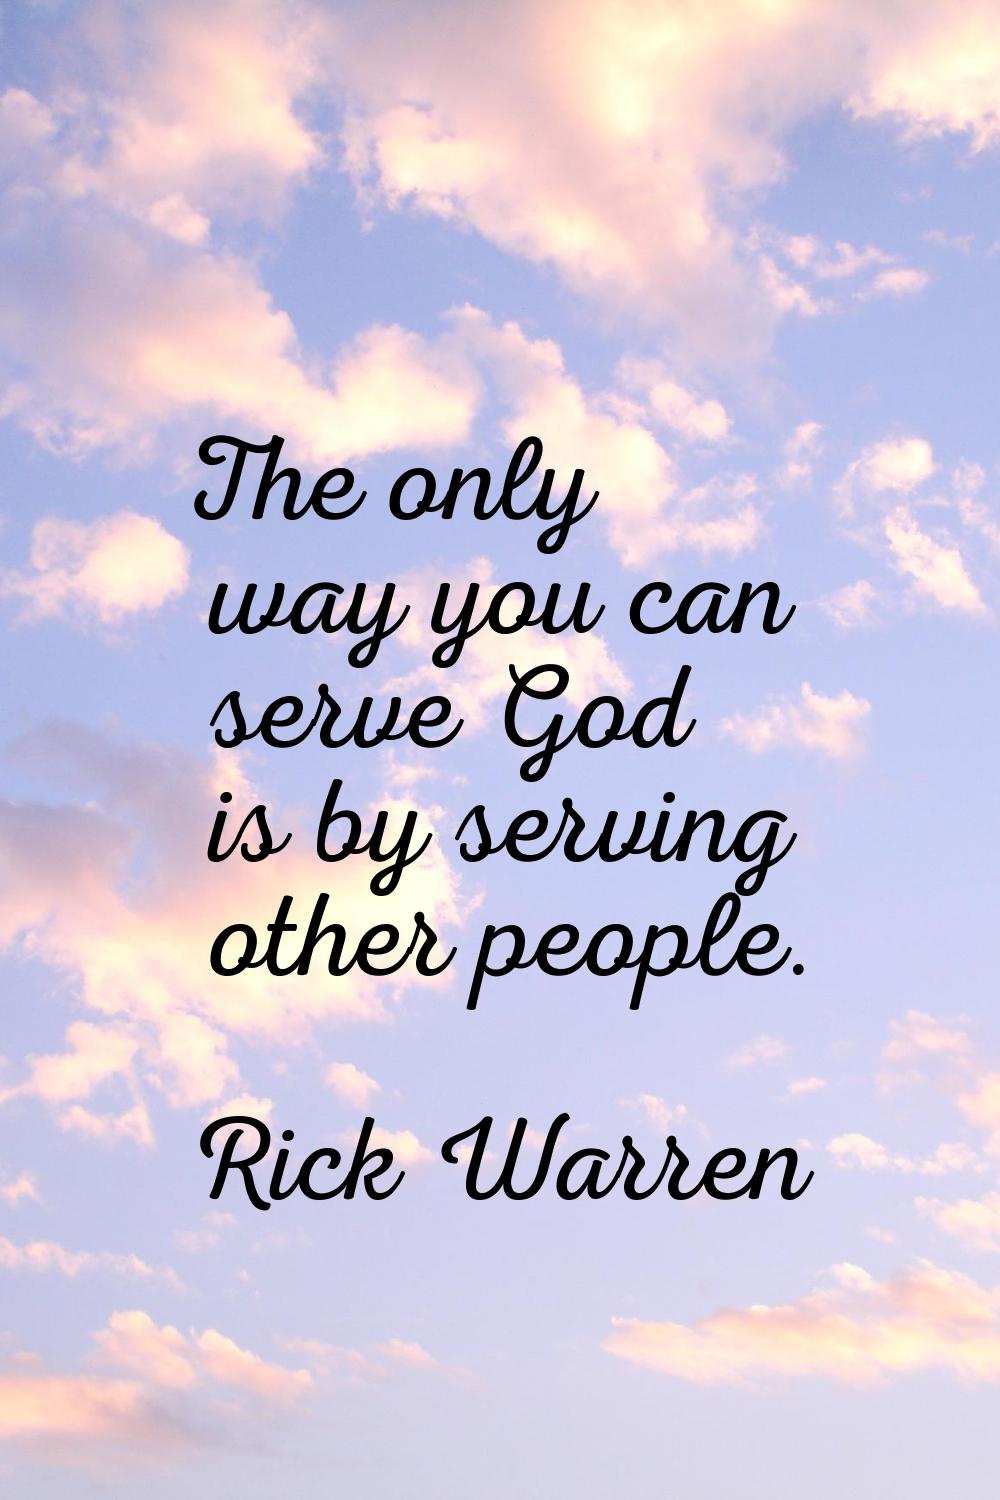 The only way you can serve God is by serving other people.